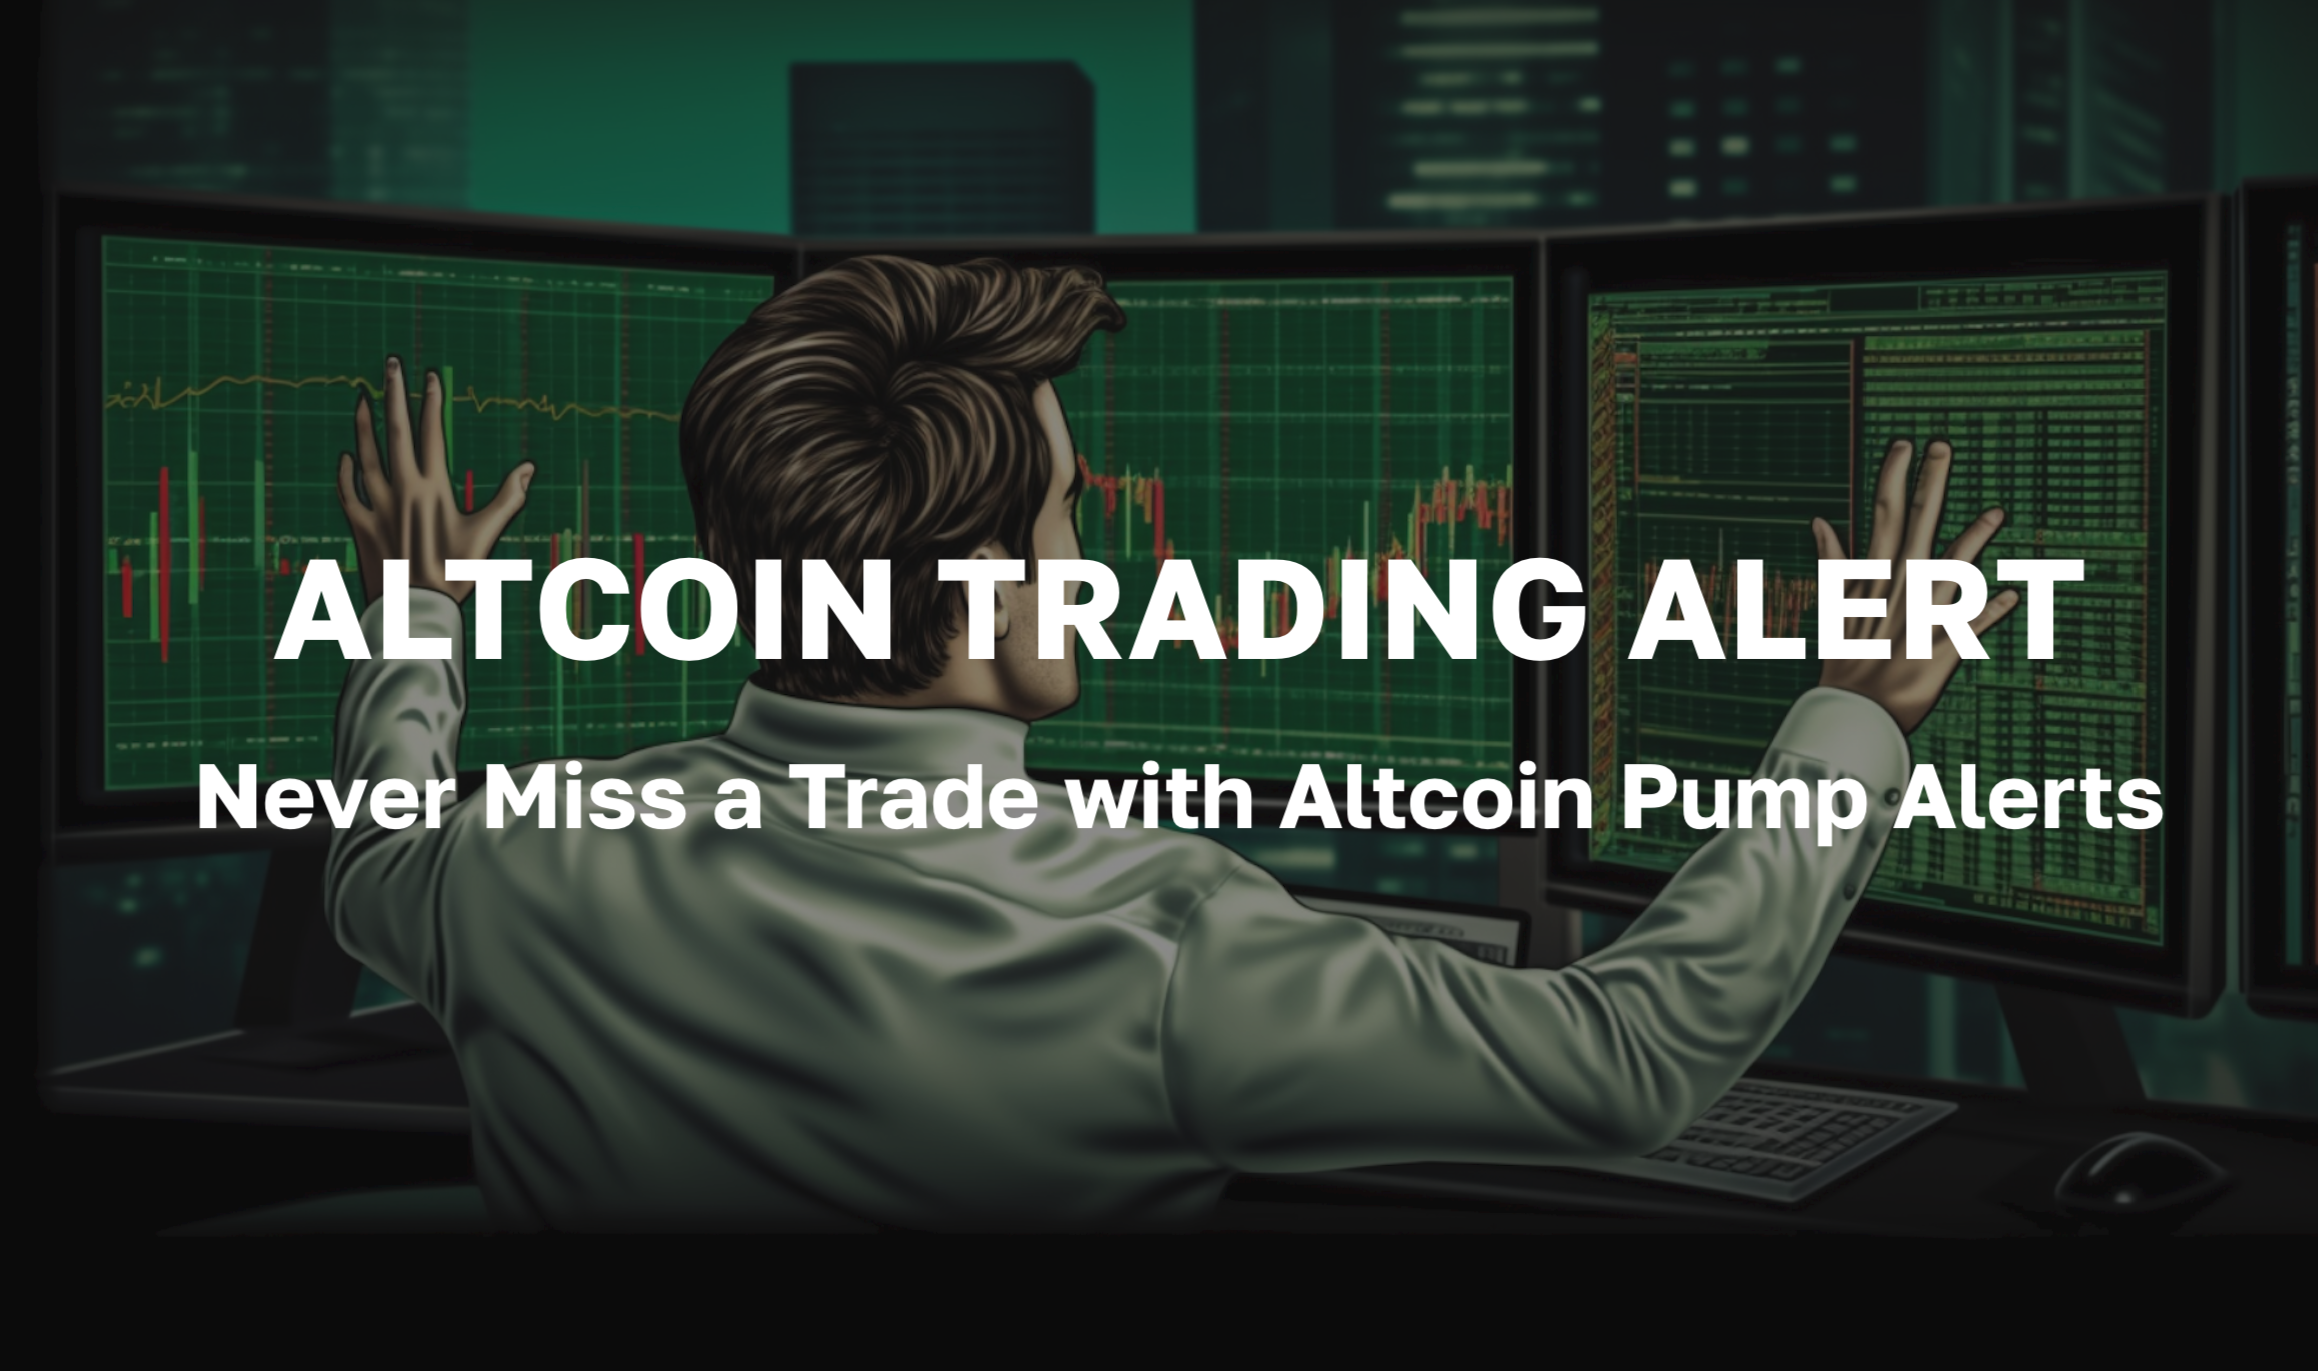 Altcoin Trading Alert - Never Miss a Trade with Altcoin Pump Alerts